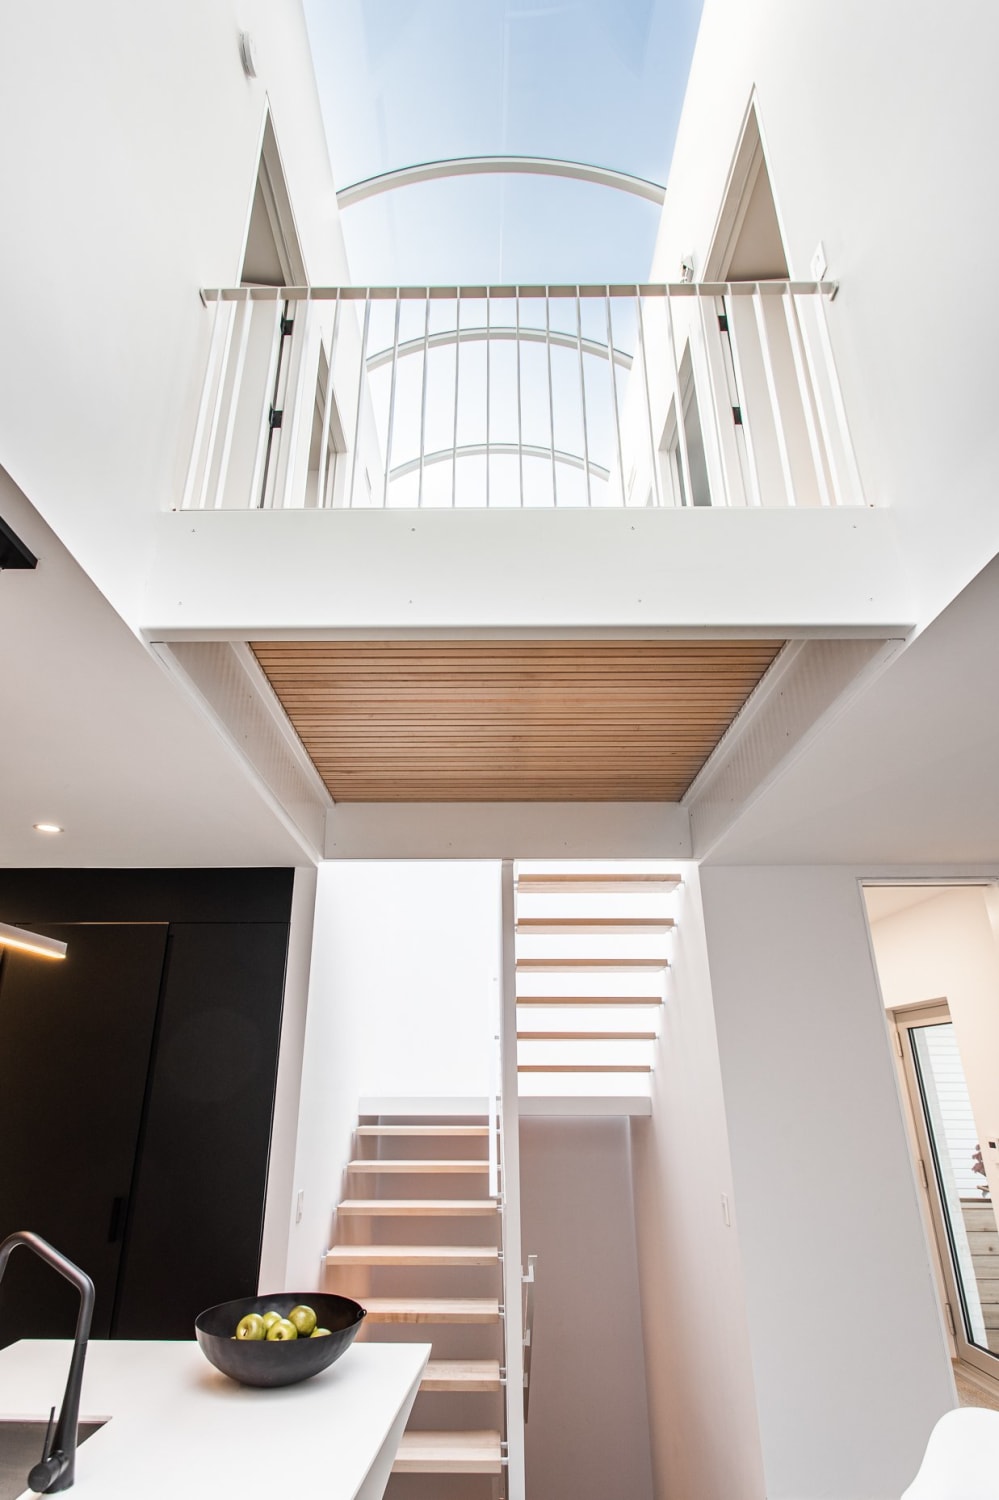 Staircase leading up to a skylight in a terraced house, Montreal, Canada by Fugere Architecture